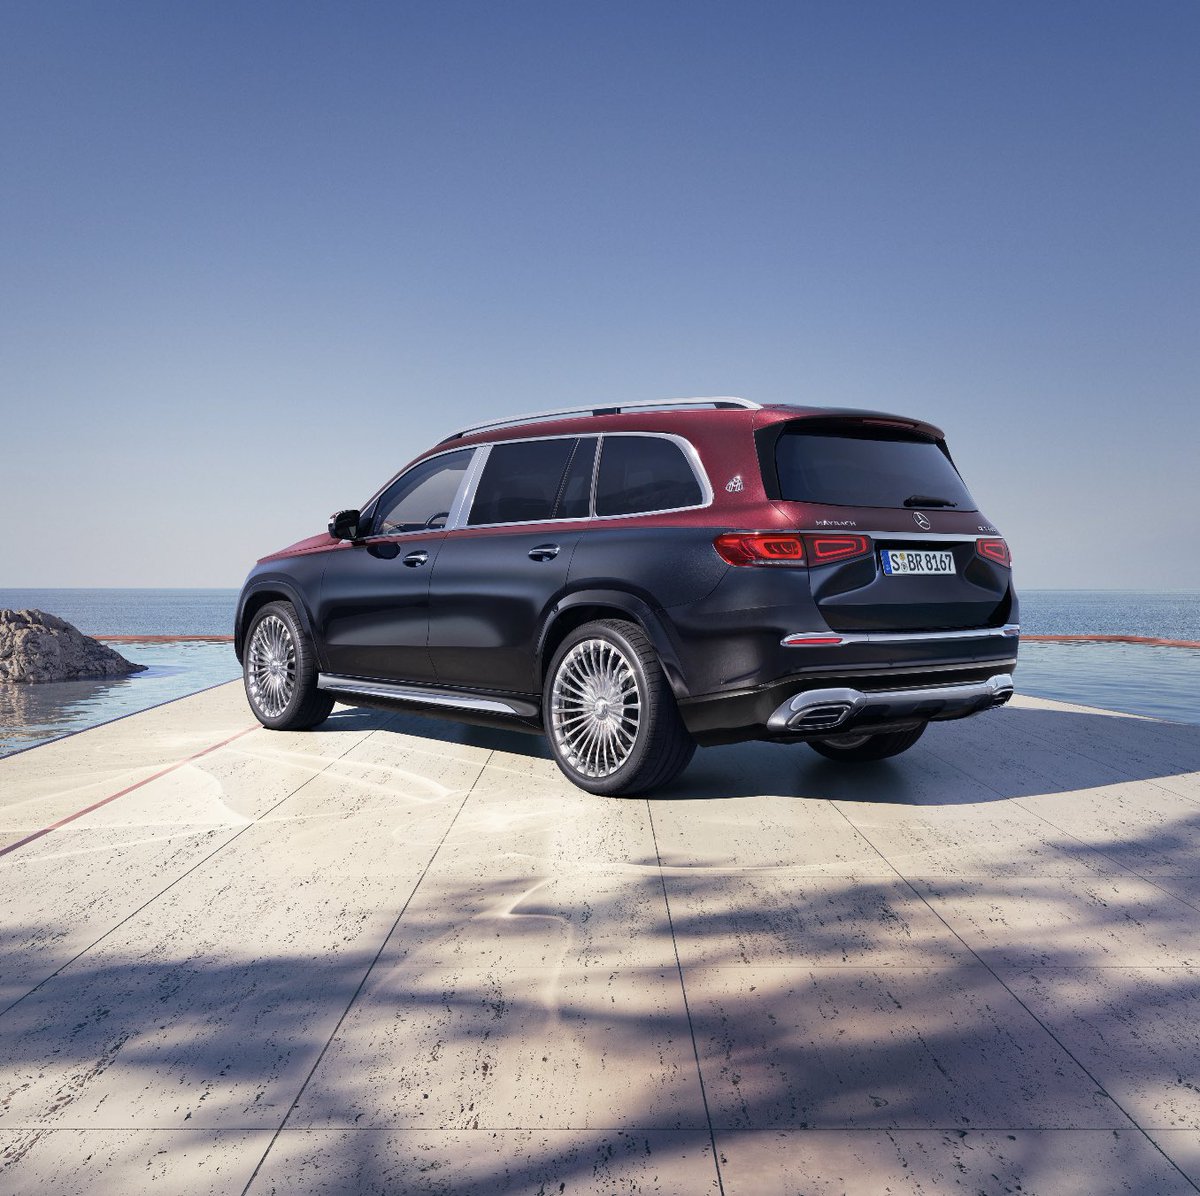 All 50 + units of the Mercedes Maybach GLS 600 4MATIC are booked even before launch. Customers to get their customised cars by first quarter 2022 #MercedesBenz #MercedesMaybachGLS